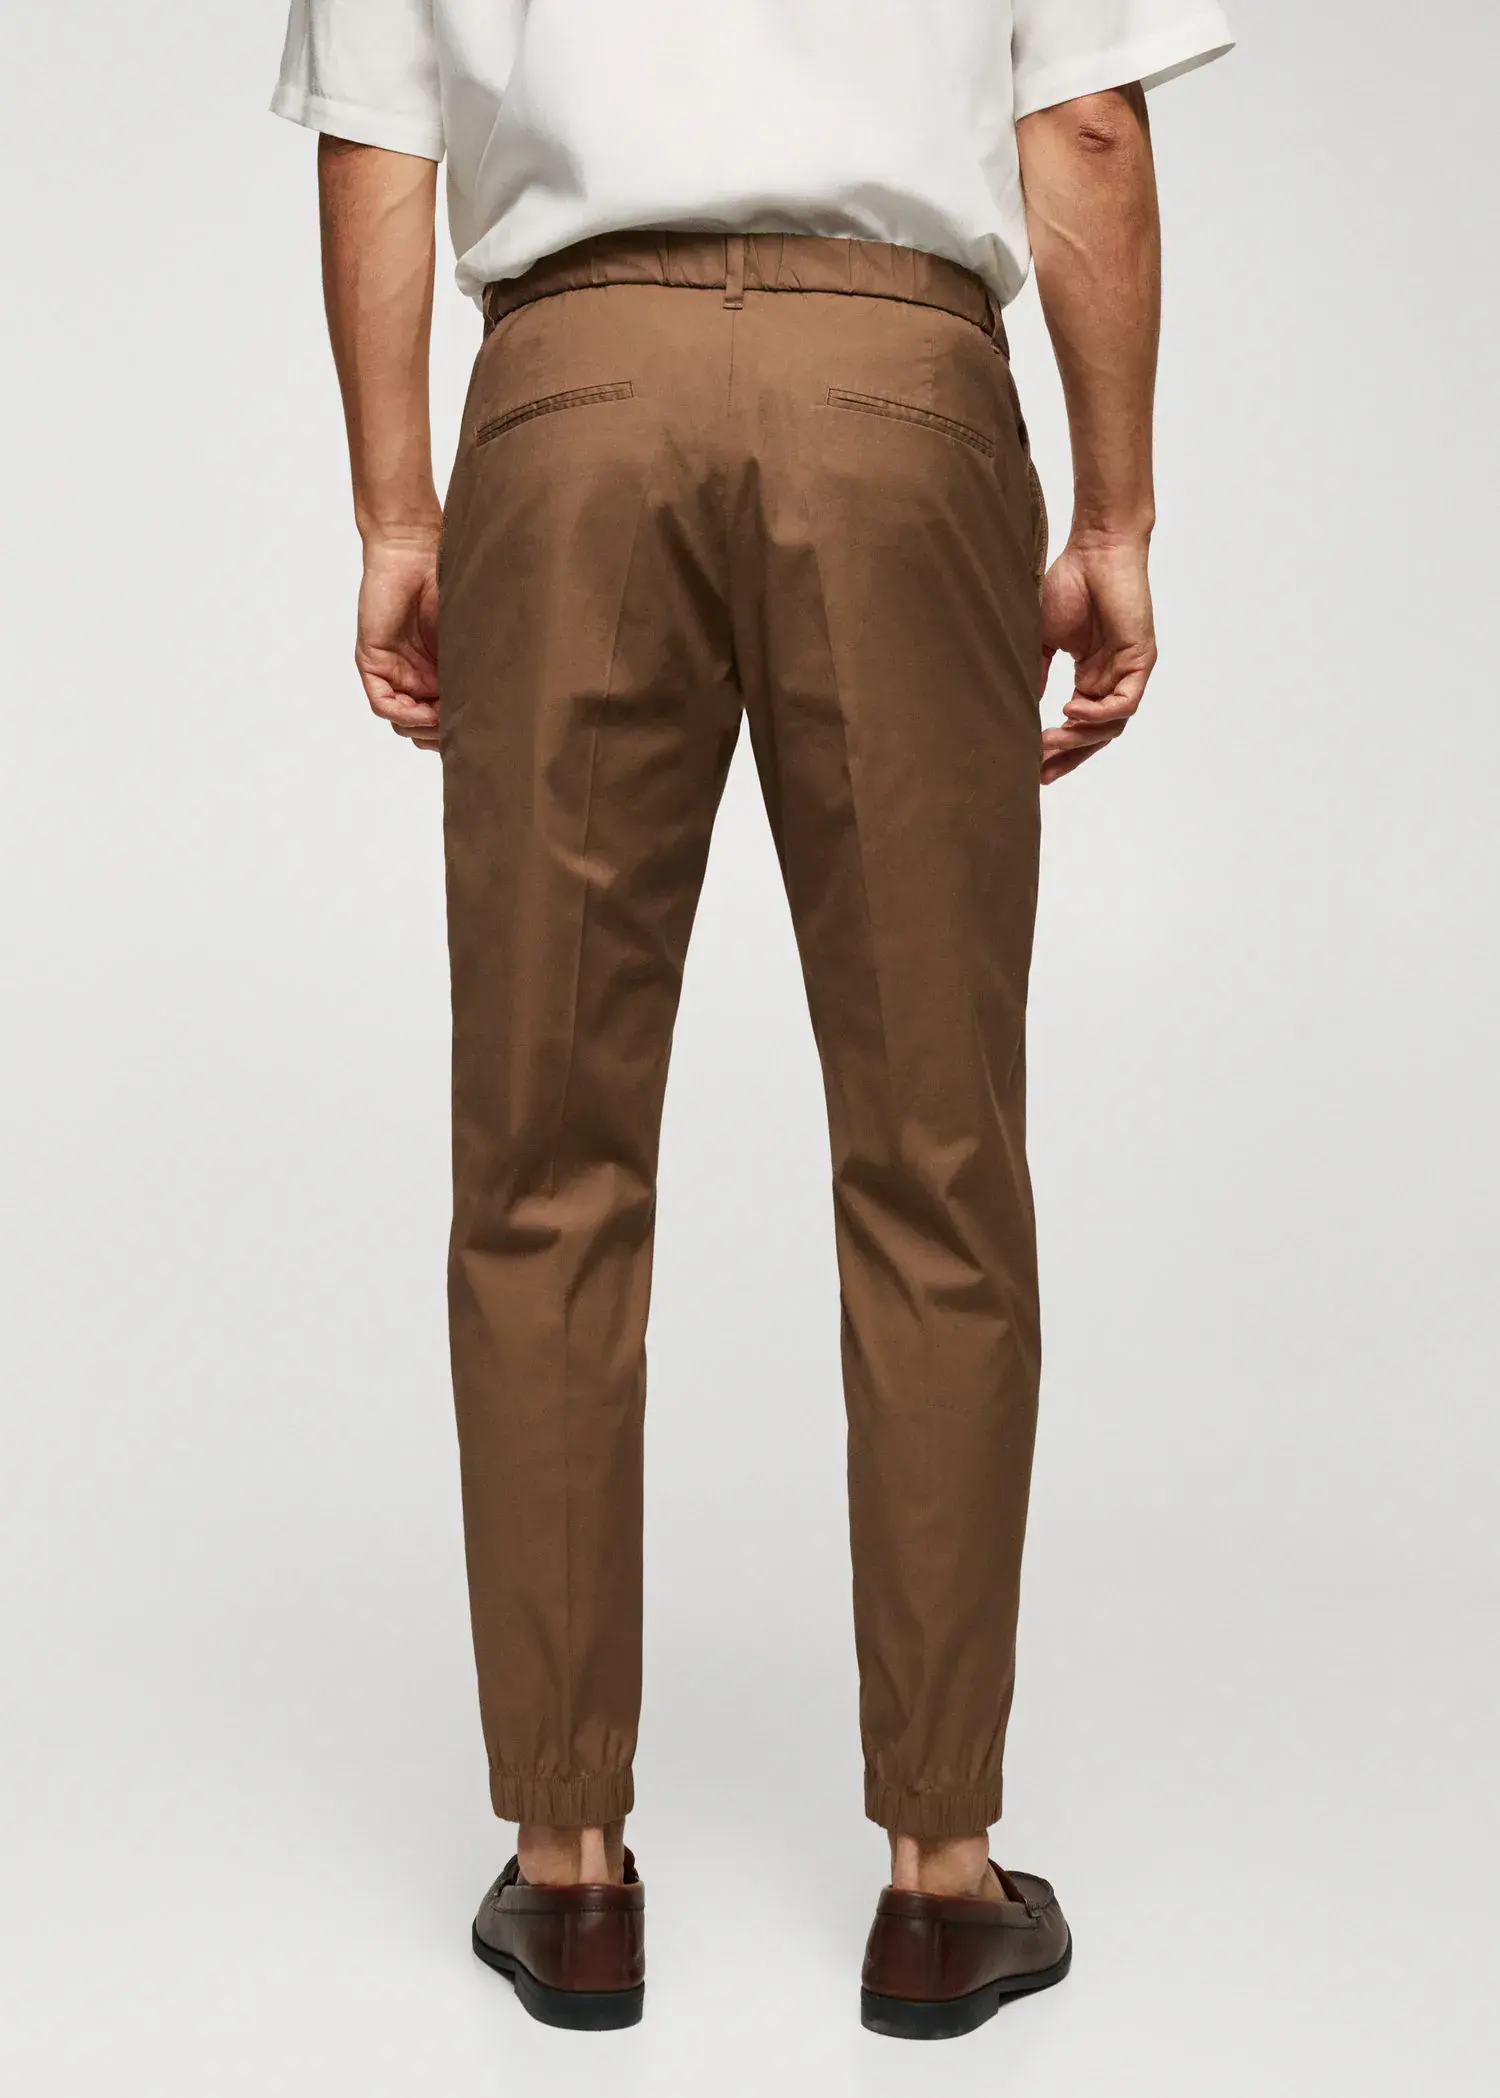 Mango Slim-fit cotton trousers. a man wearing brown pants and a white shirt. 